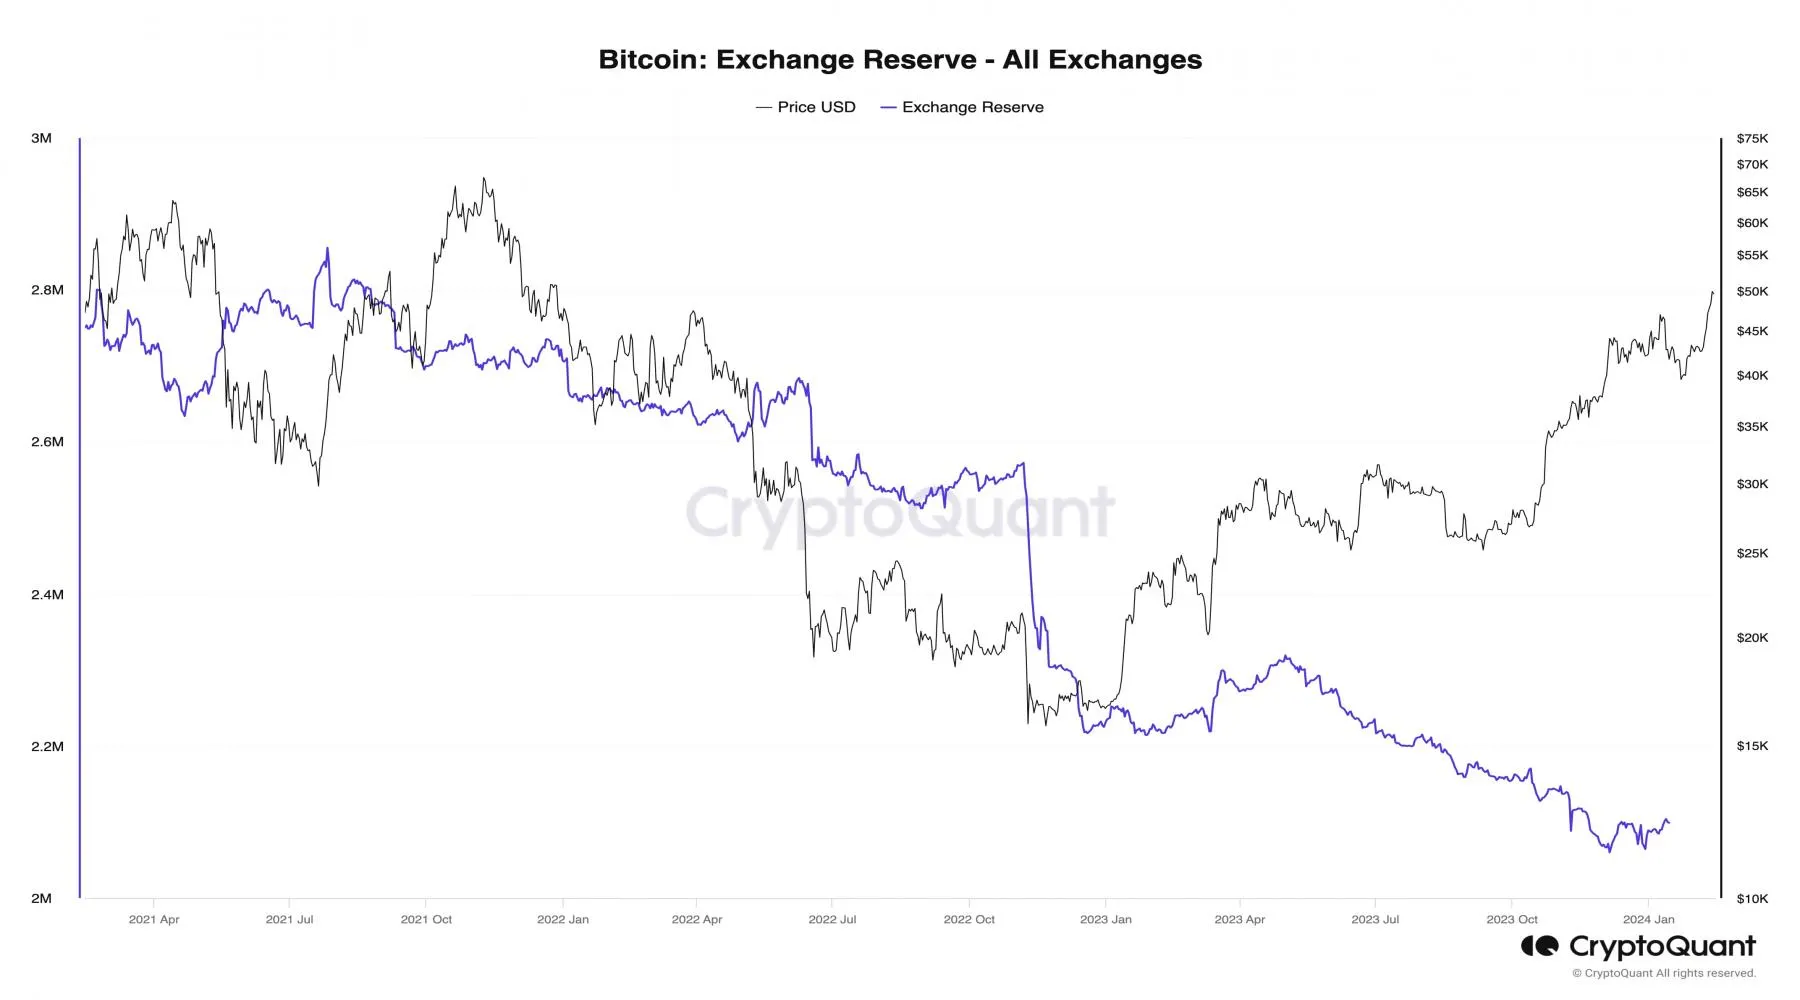 Graph showing Bitcoin's exchange reserve (all exchanges)